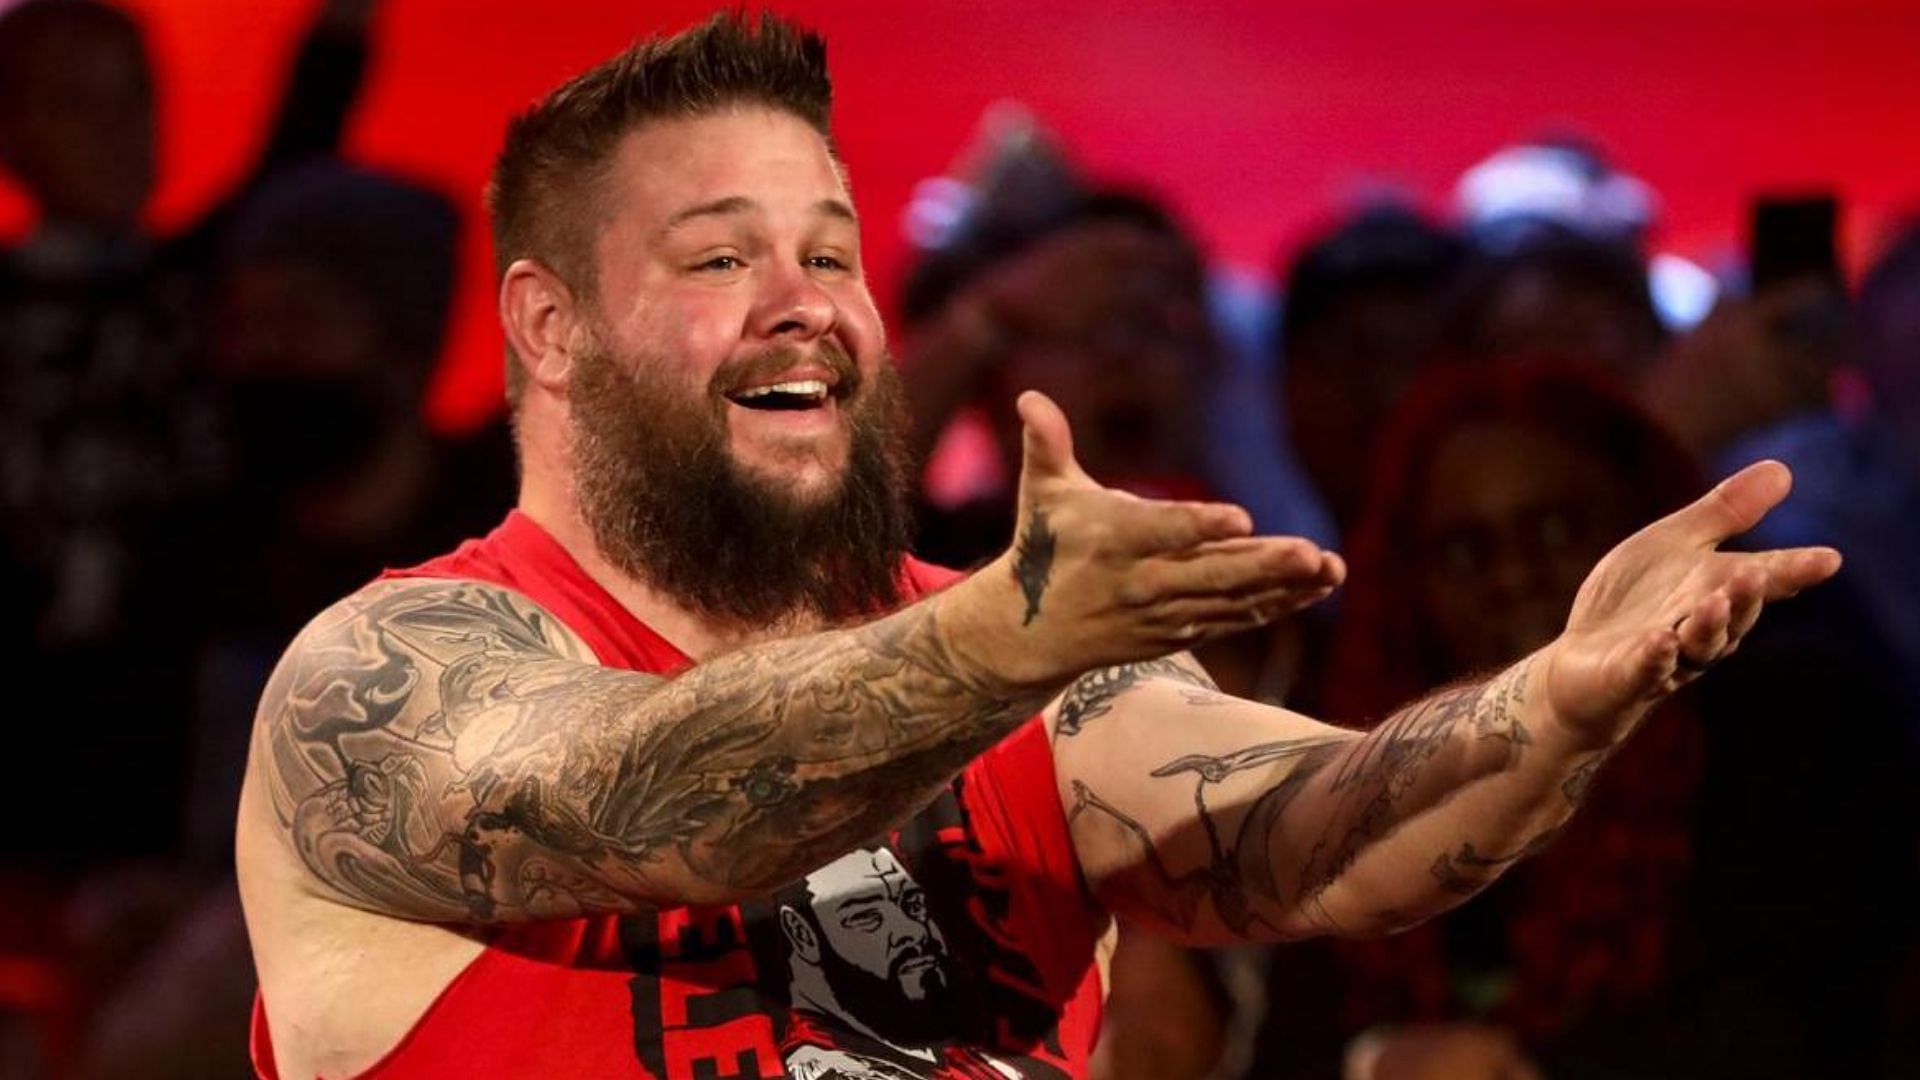 WWE has released an interesting new shirt for Kevin Owens